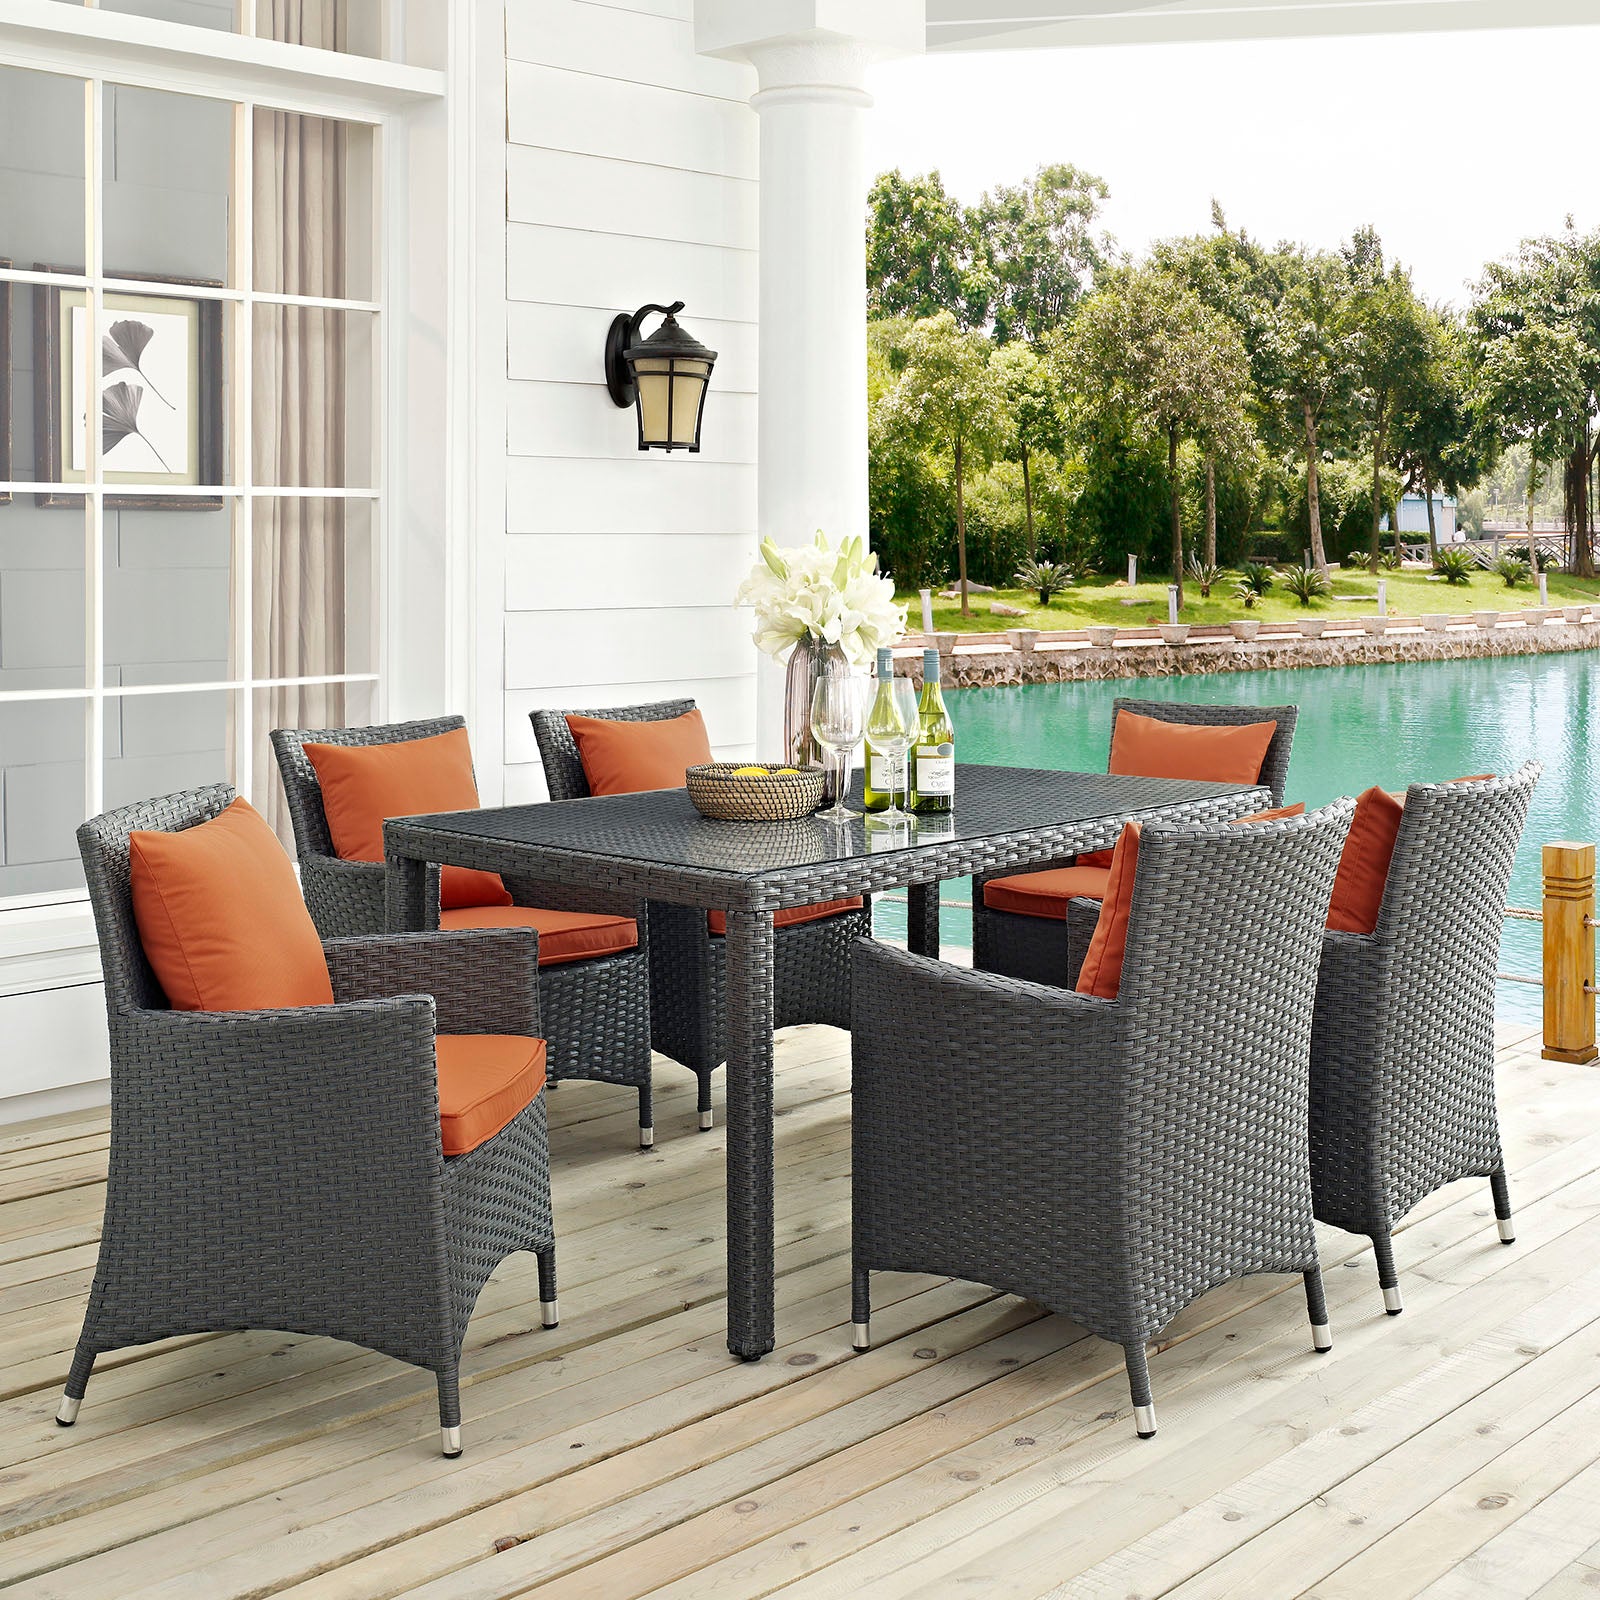 Modway Outdoor Dining Sets - Sojourn 7 Piece Outdoor Patio Sunbrella Dining Set Canvas Tuscan